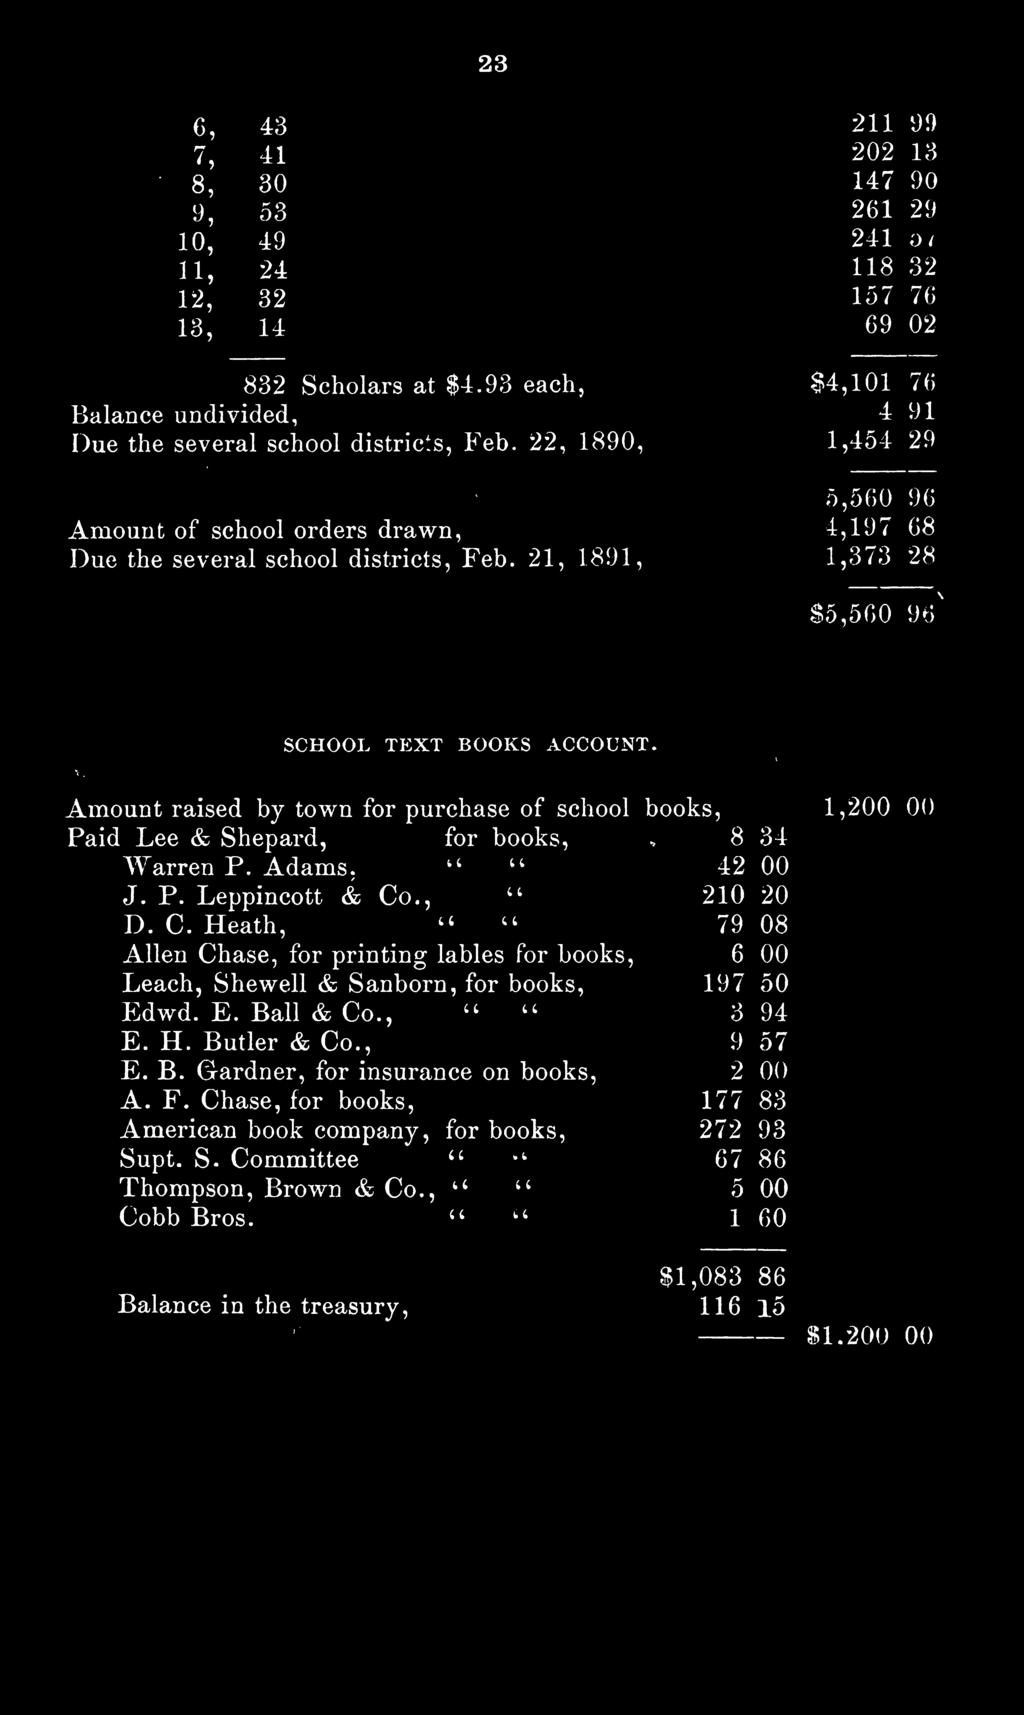 21, 1891, 1,373 28 $5,500 96 \ V. SCHOOL TEXT BOOKS ACCOUNT. V Amount raised by town for purchase of school books, 1,200 00 Paid Lee & Shepard, for books, - 8 34 Warren P. Adams, 42 00 J. P. Leppincott & Co.